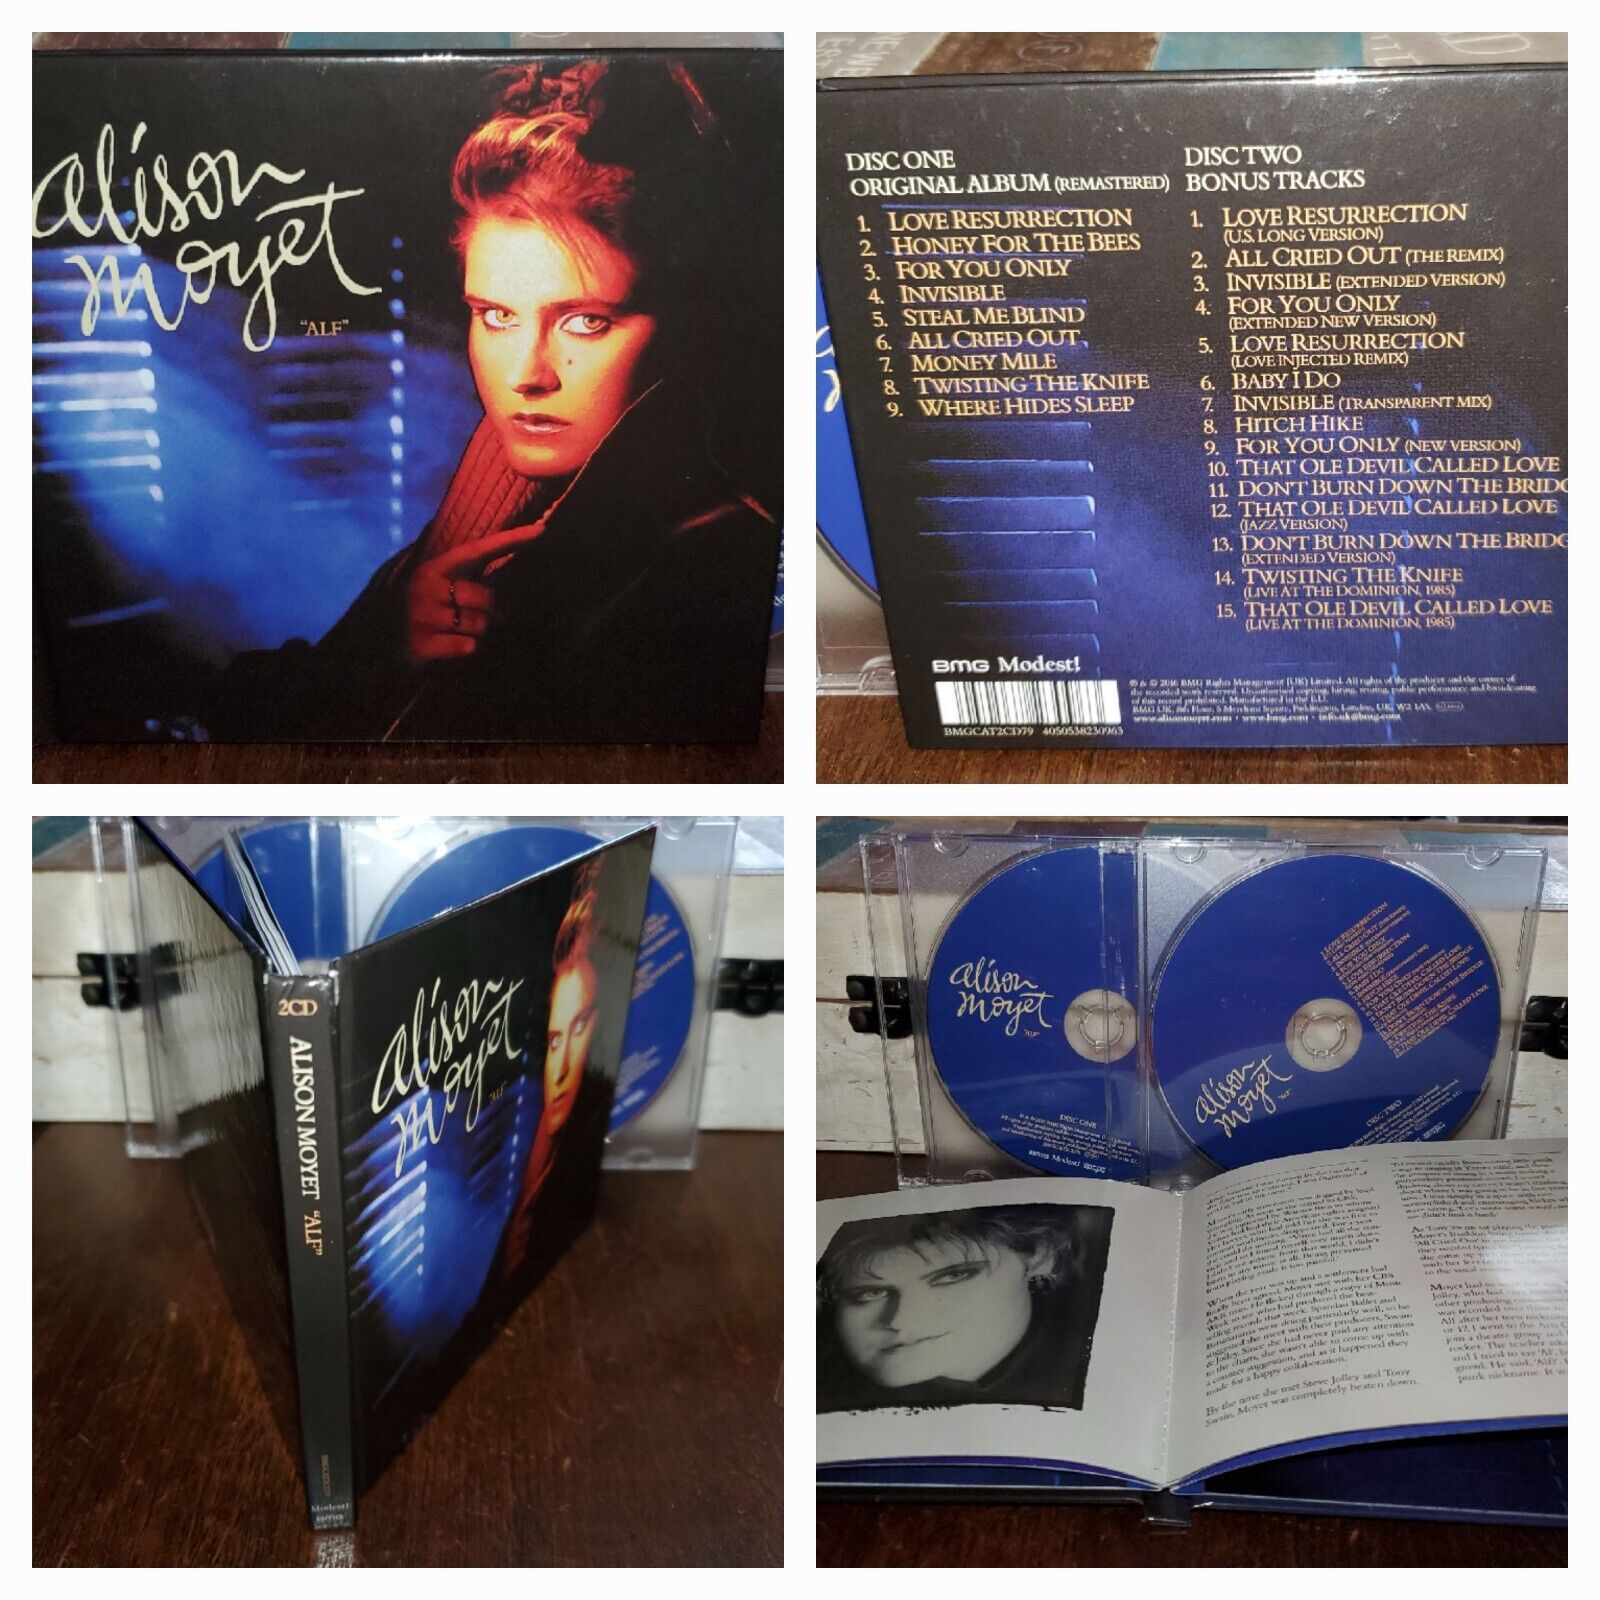 ALISON MOYET 2 CD ALF DELUXE EDITION INVISIBLE LOVE RESURRECTION ALL CRIED OUT